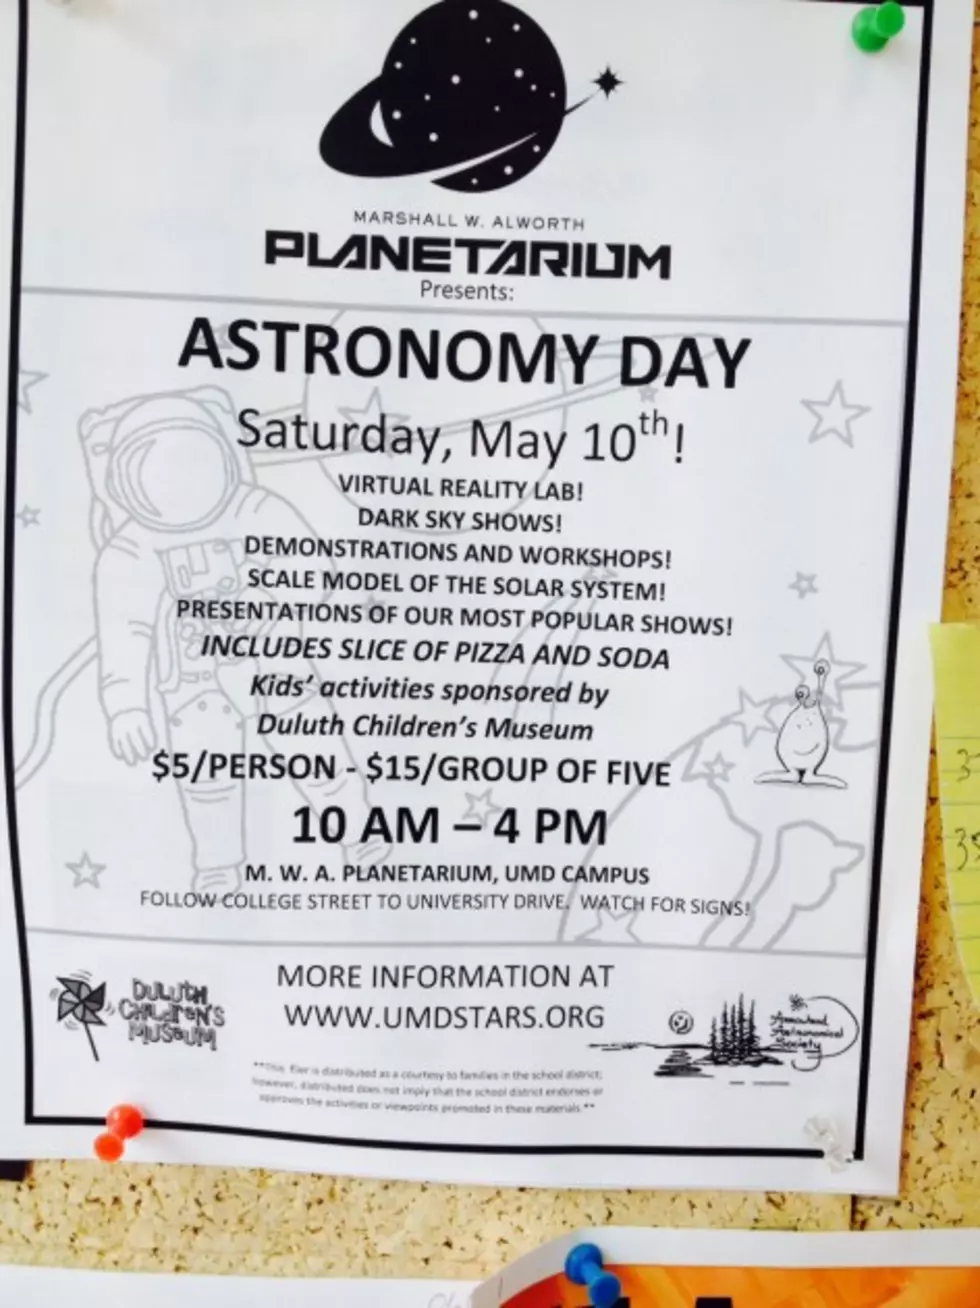 Astronomy Day this Saturday May 10th at U.M.D.